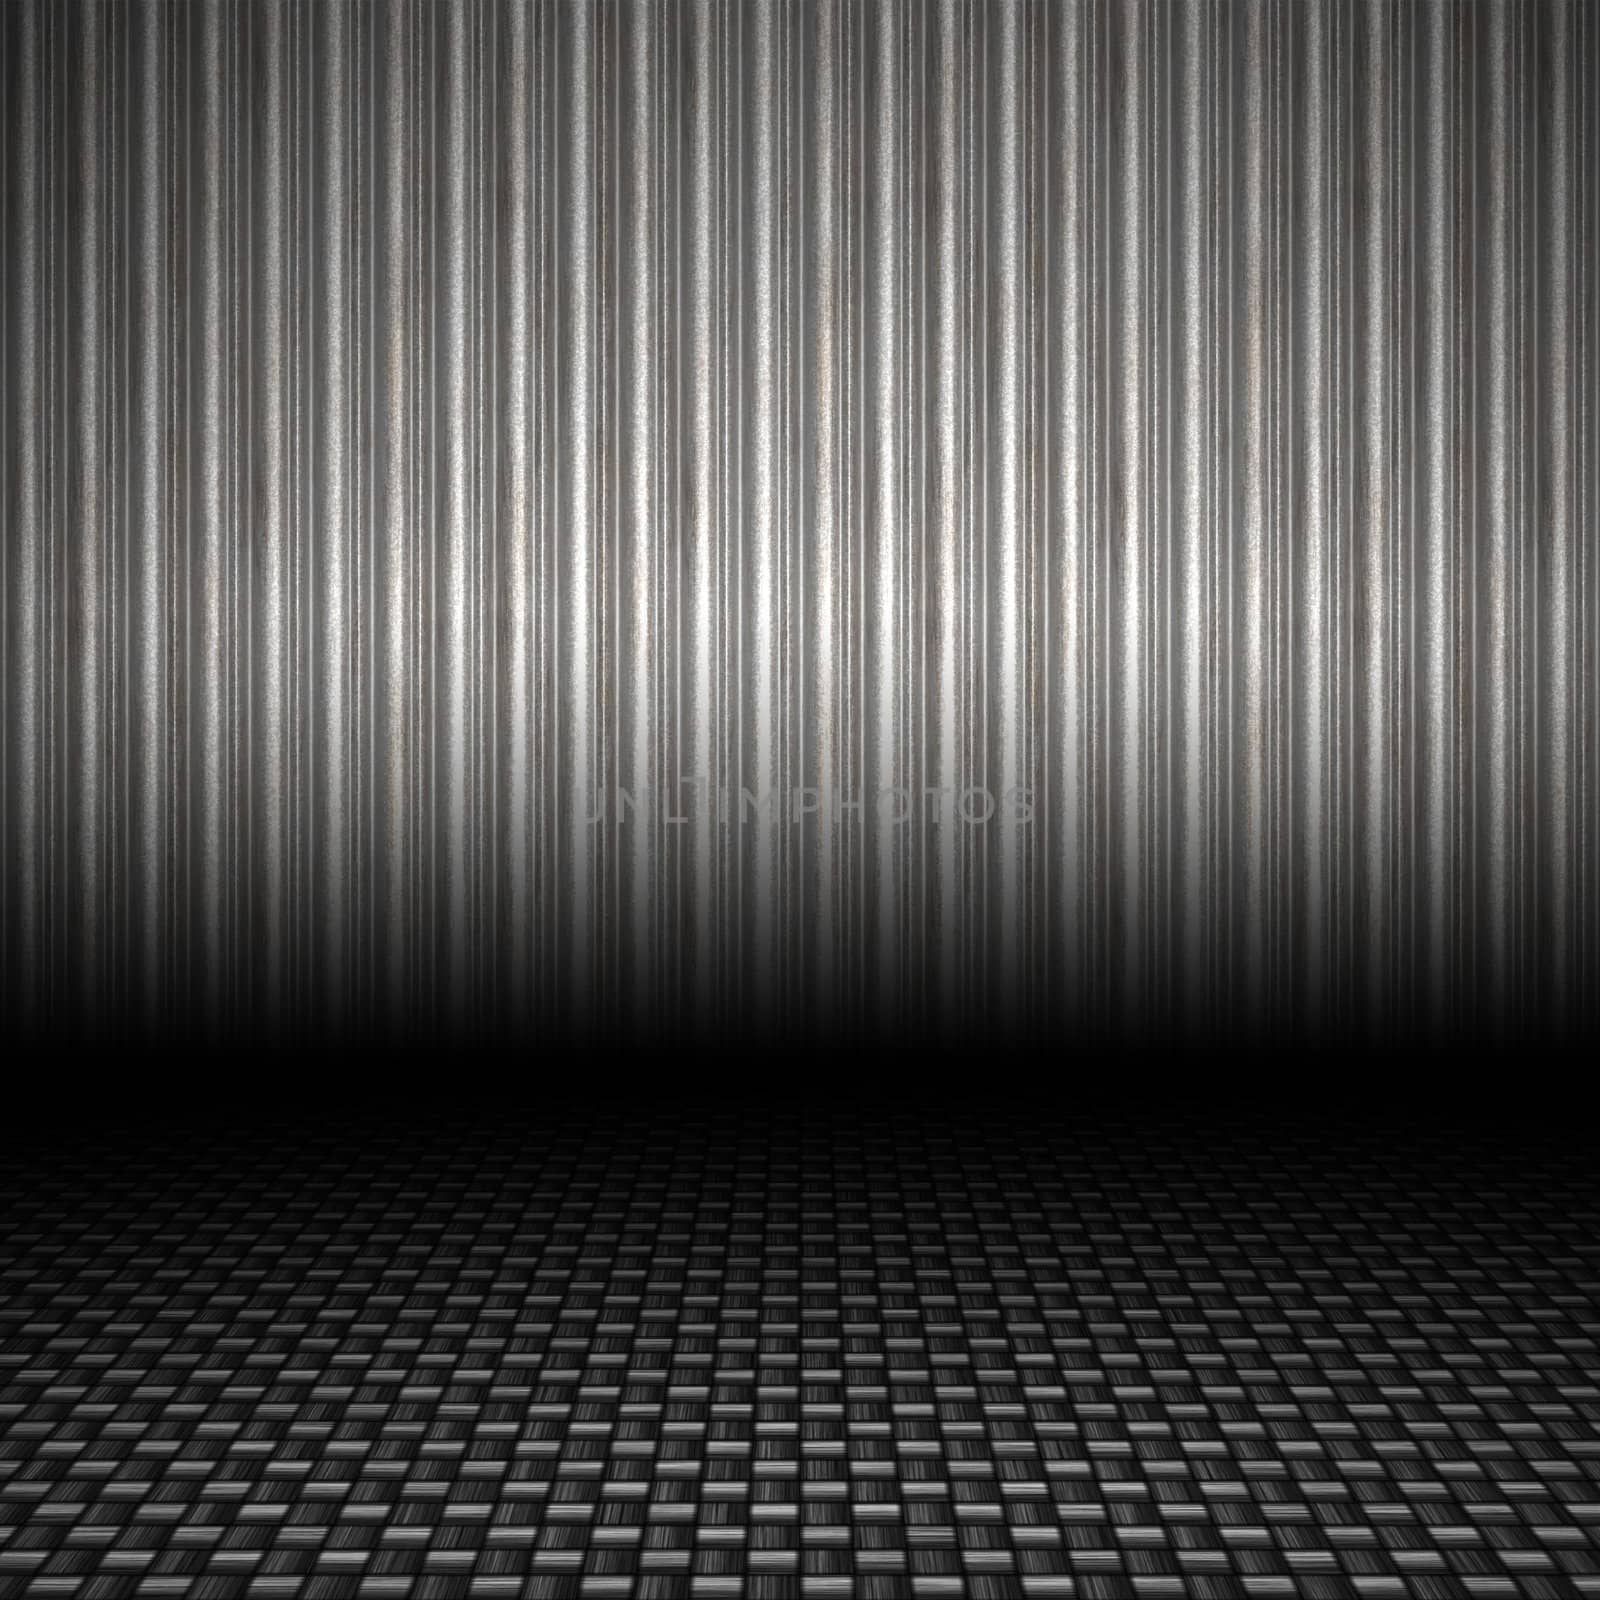 A realistic corrugated metal textured backdrop with 3D perspective and a carbon fiber floor.